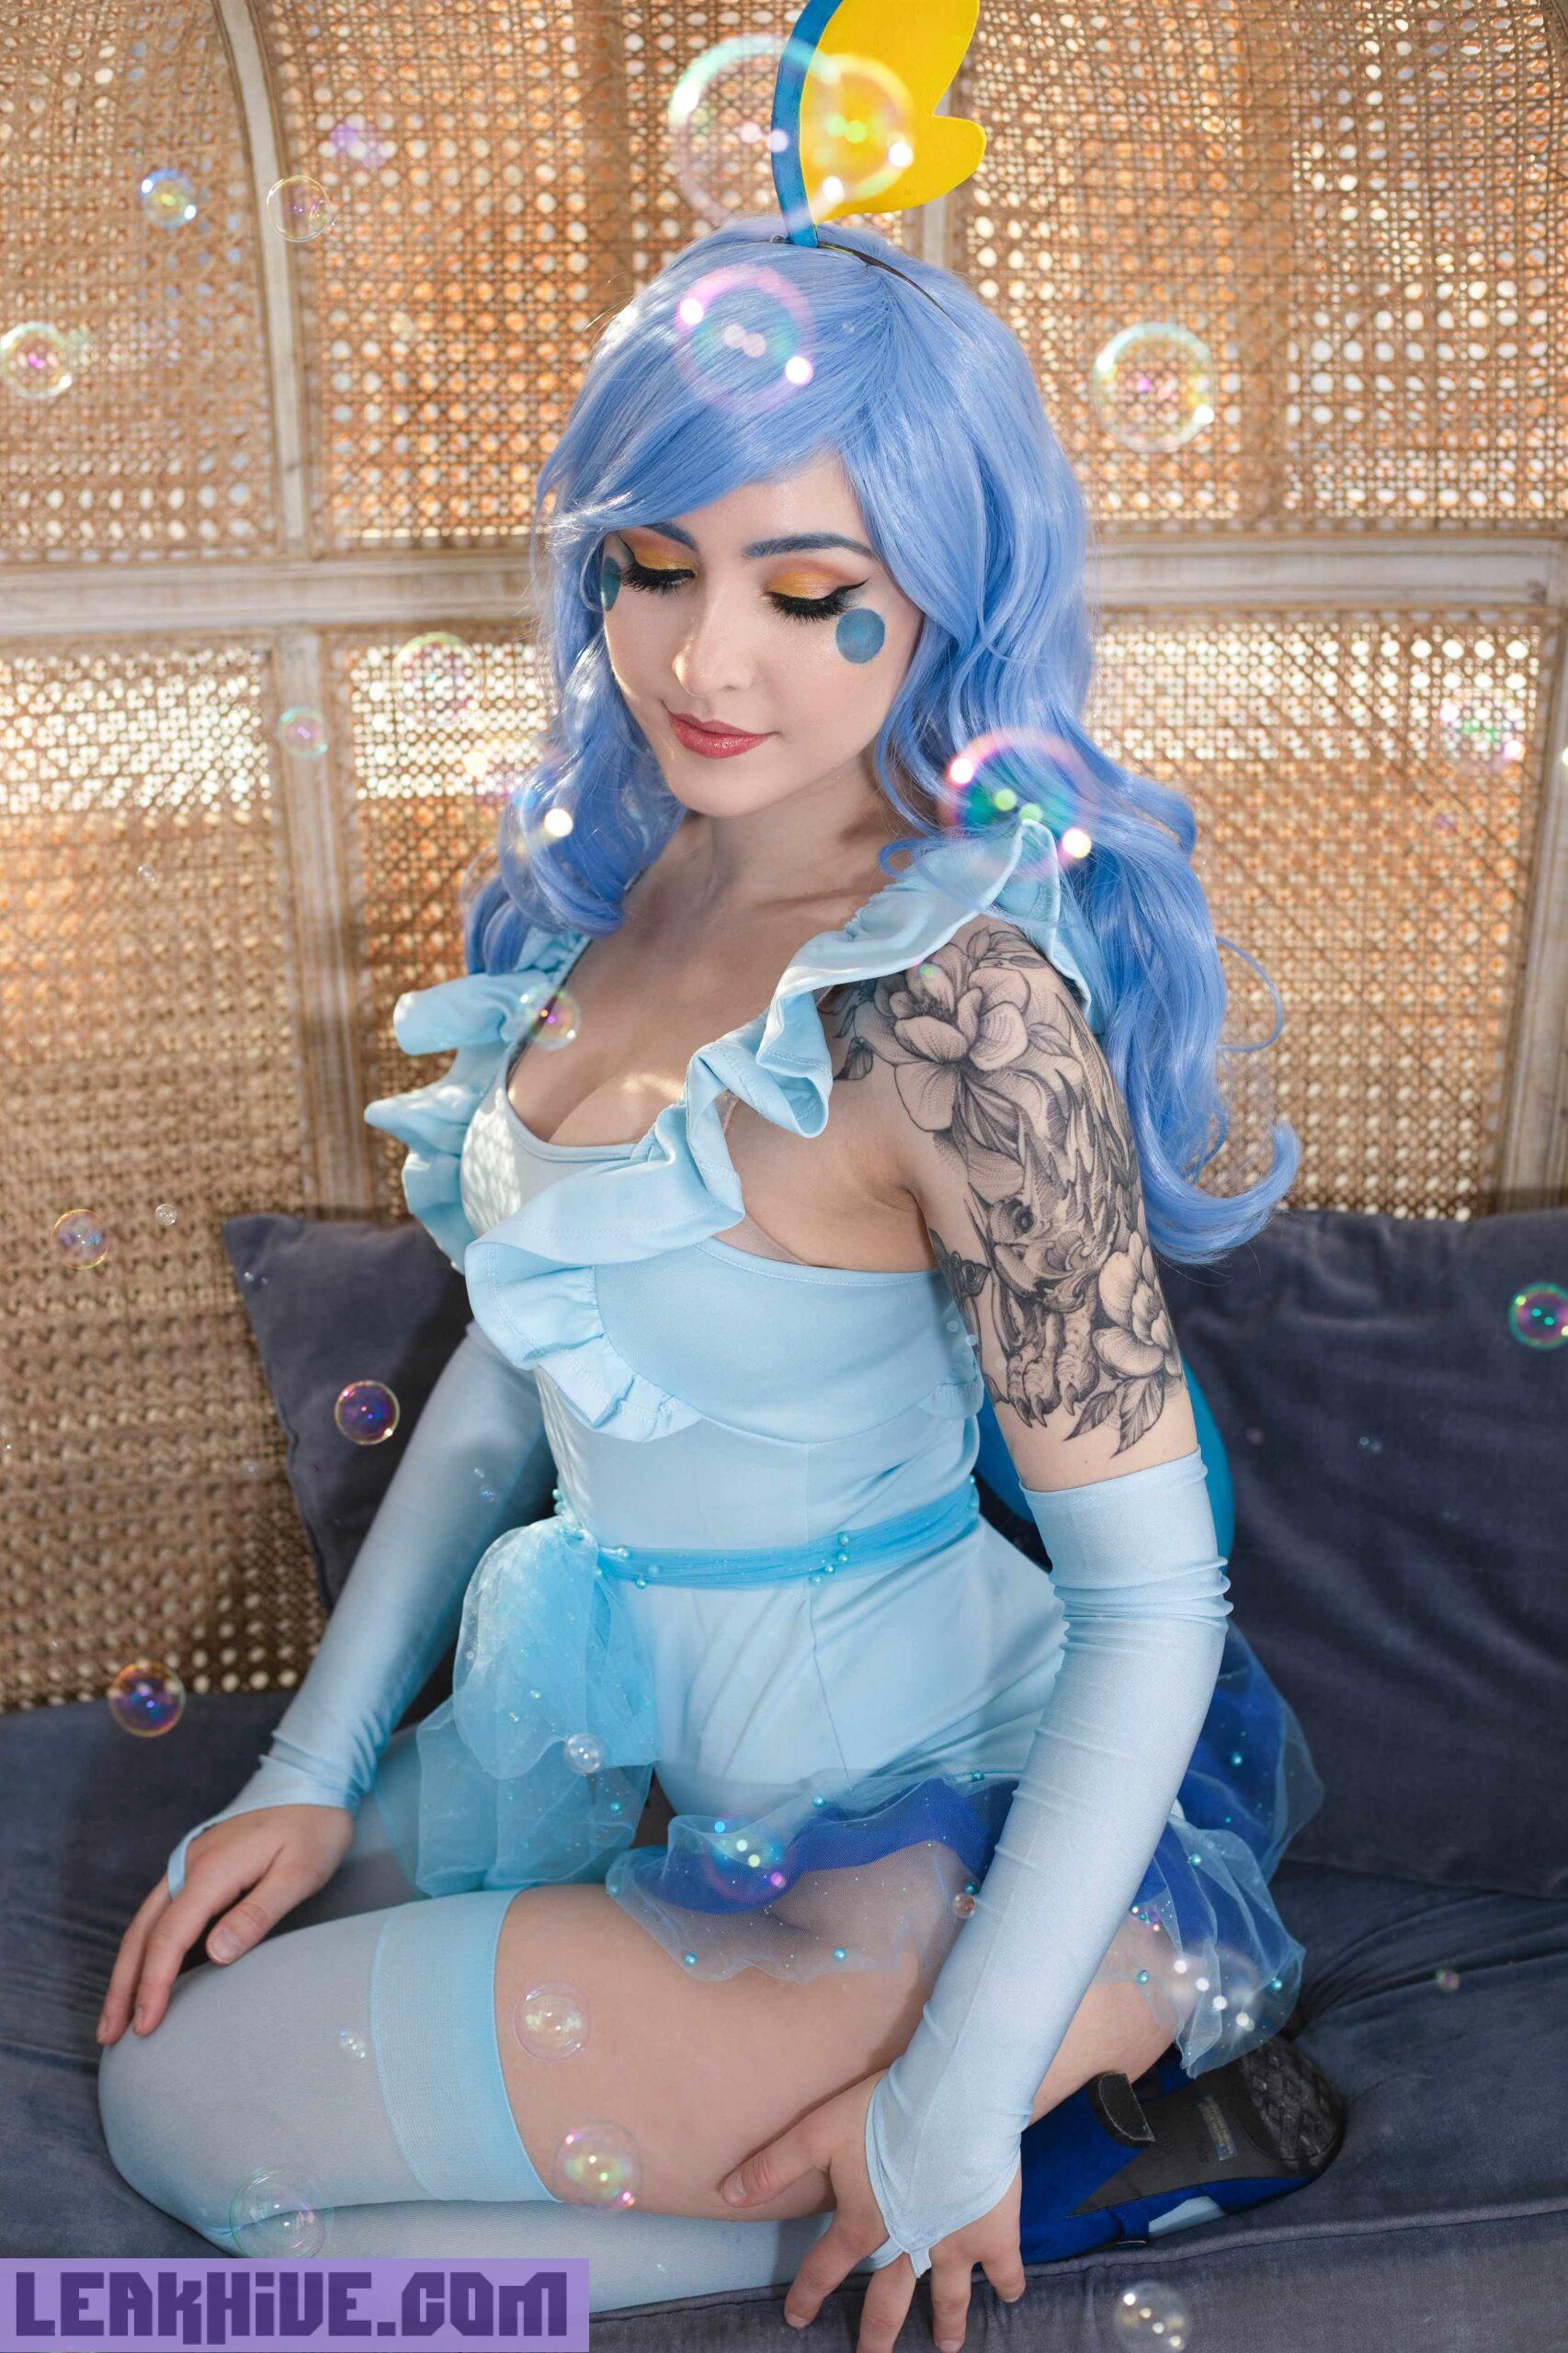 1649976607 475 Luxlo Cosplay Sobble 20 scaled